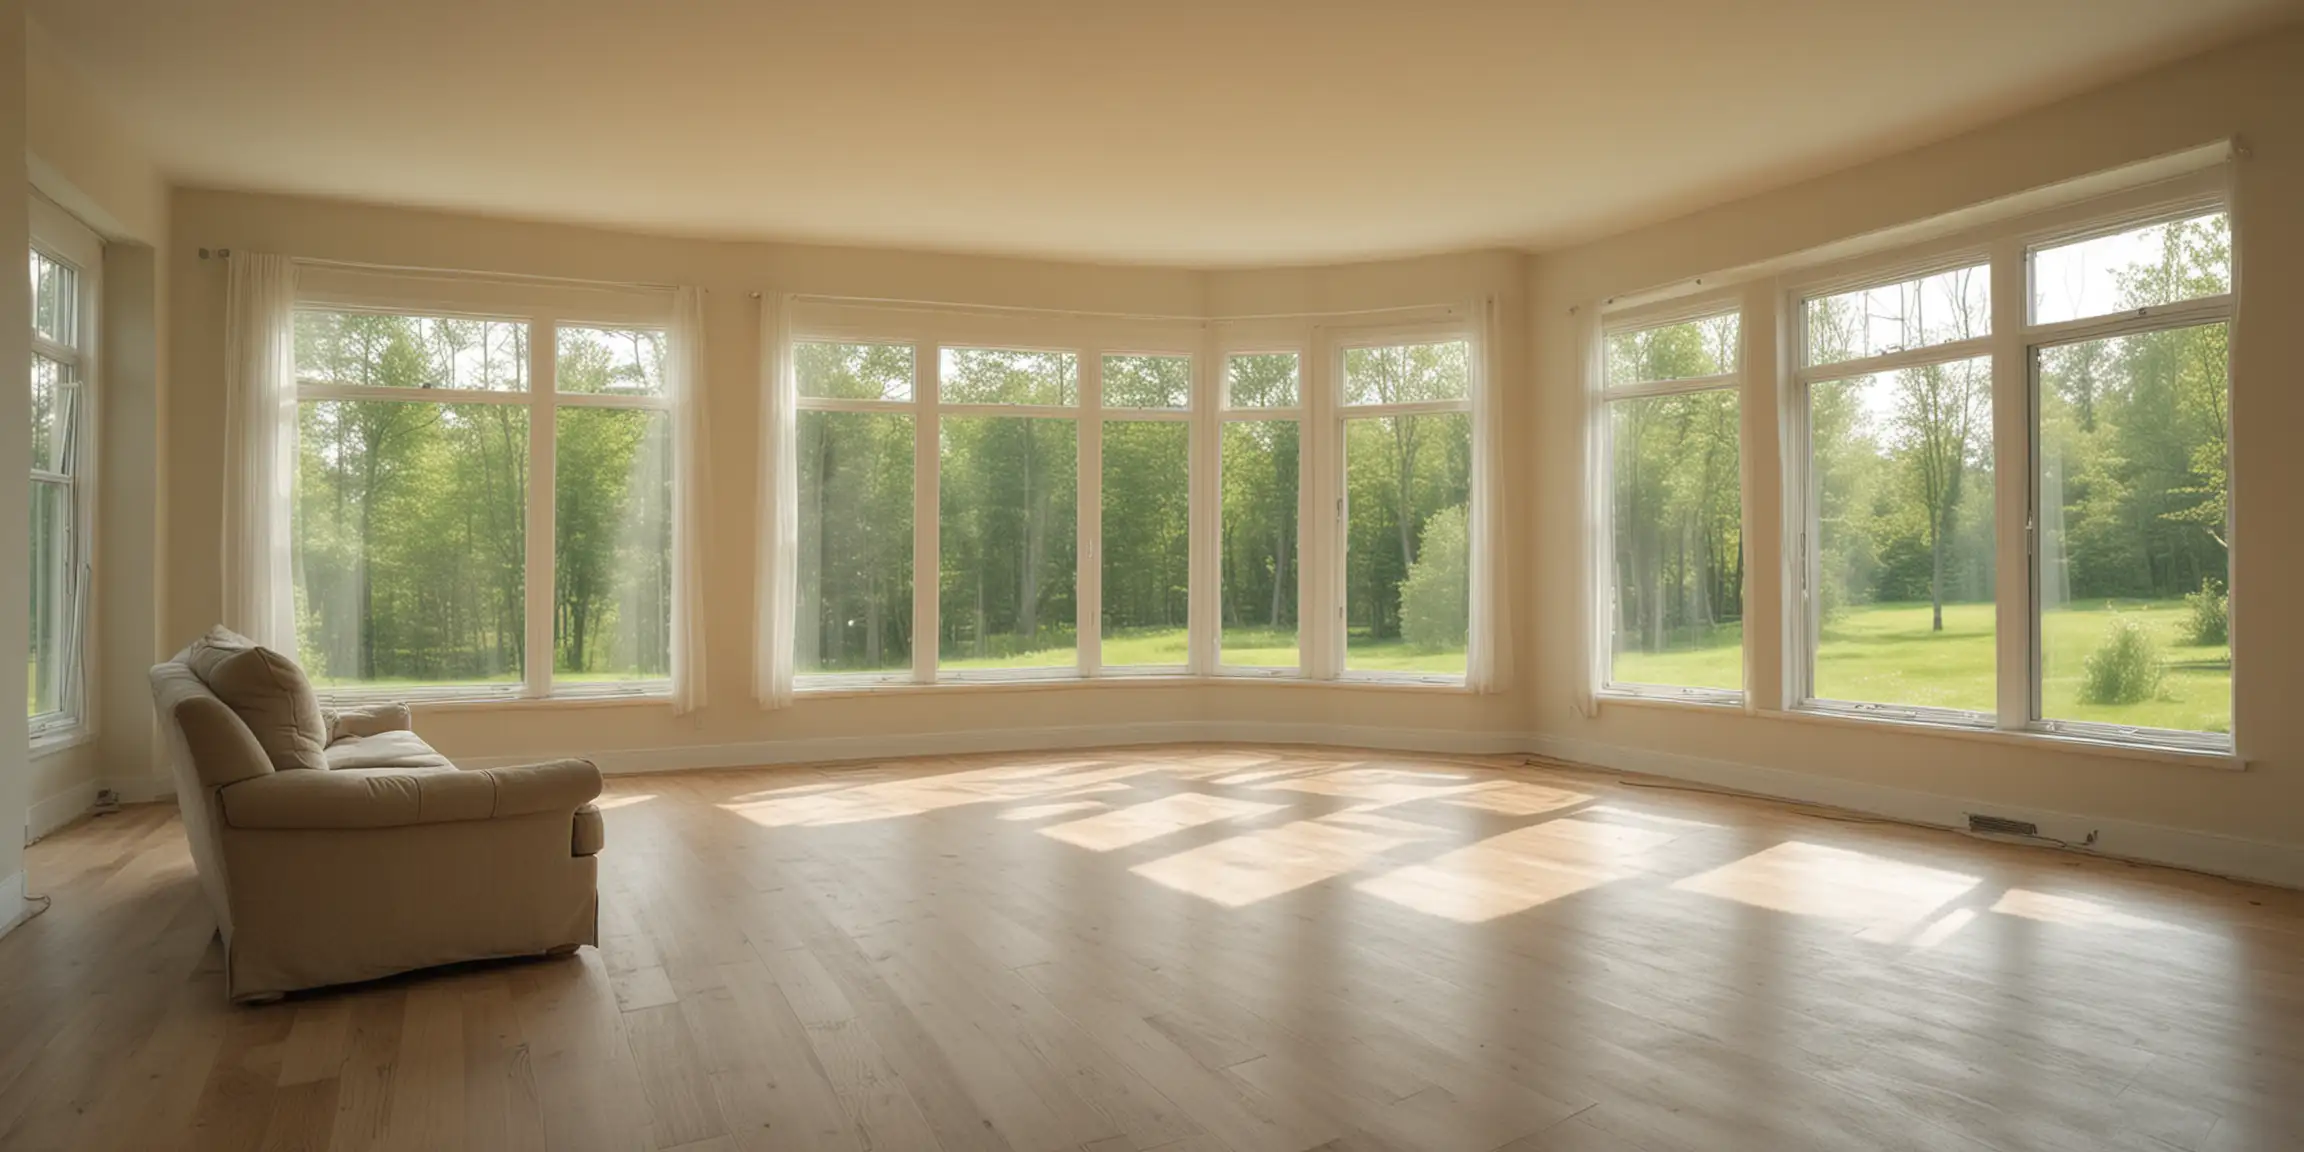  Large empty cozy living room with windows, sommer in the background